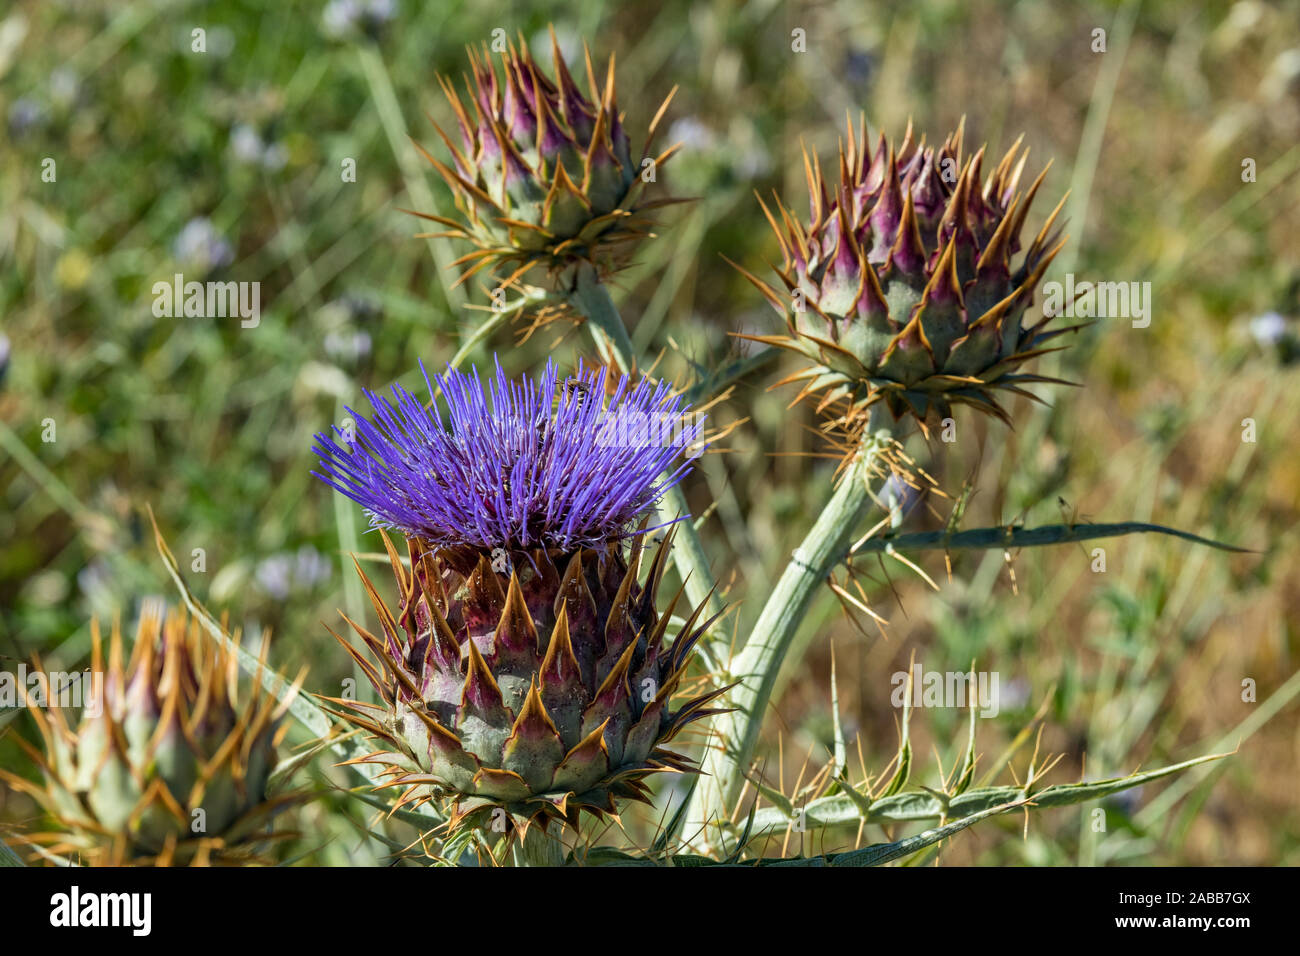 Cardoon. Beautiful flower of purple canarian thistle with bees on it close-up. Flowering thistle or milk thistle. Cynara cardunculus, alcachofa silves Stock Photo